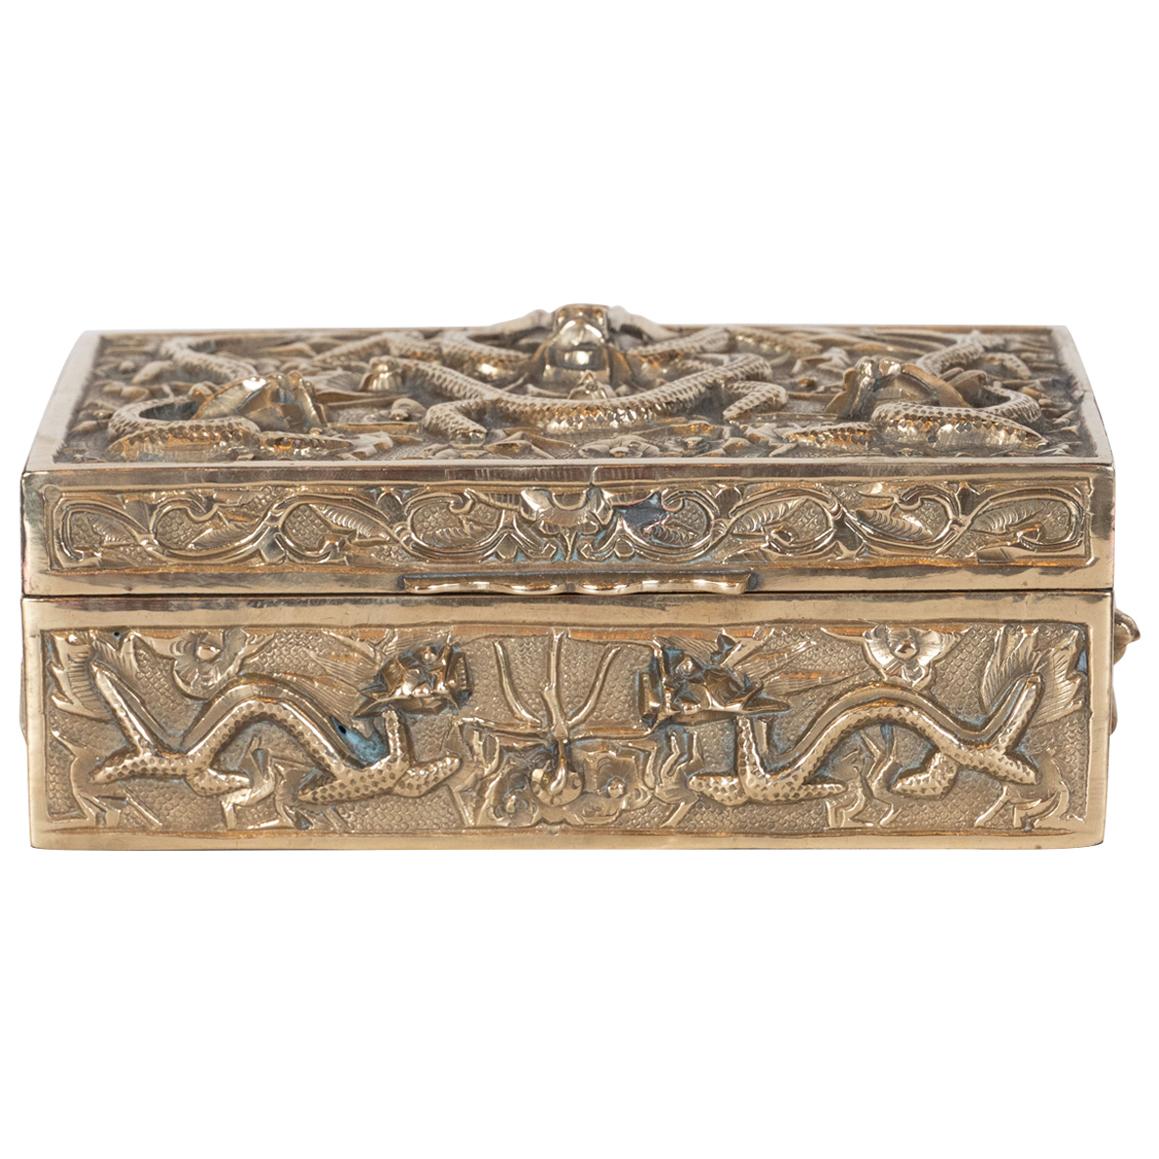 Art Deco Brass Rectangular Decorative Box with Dragon Motif in High Relief